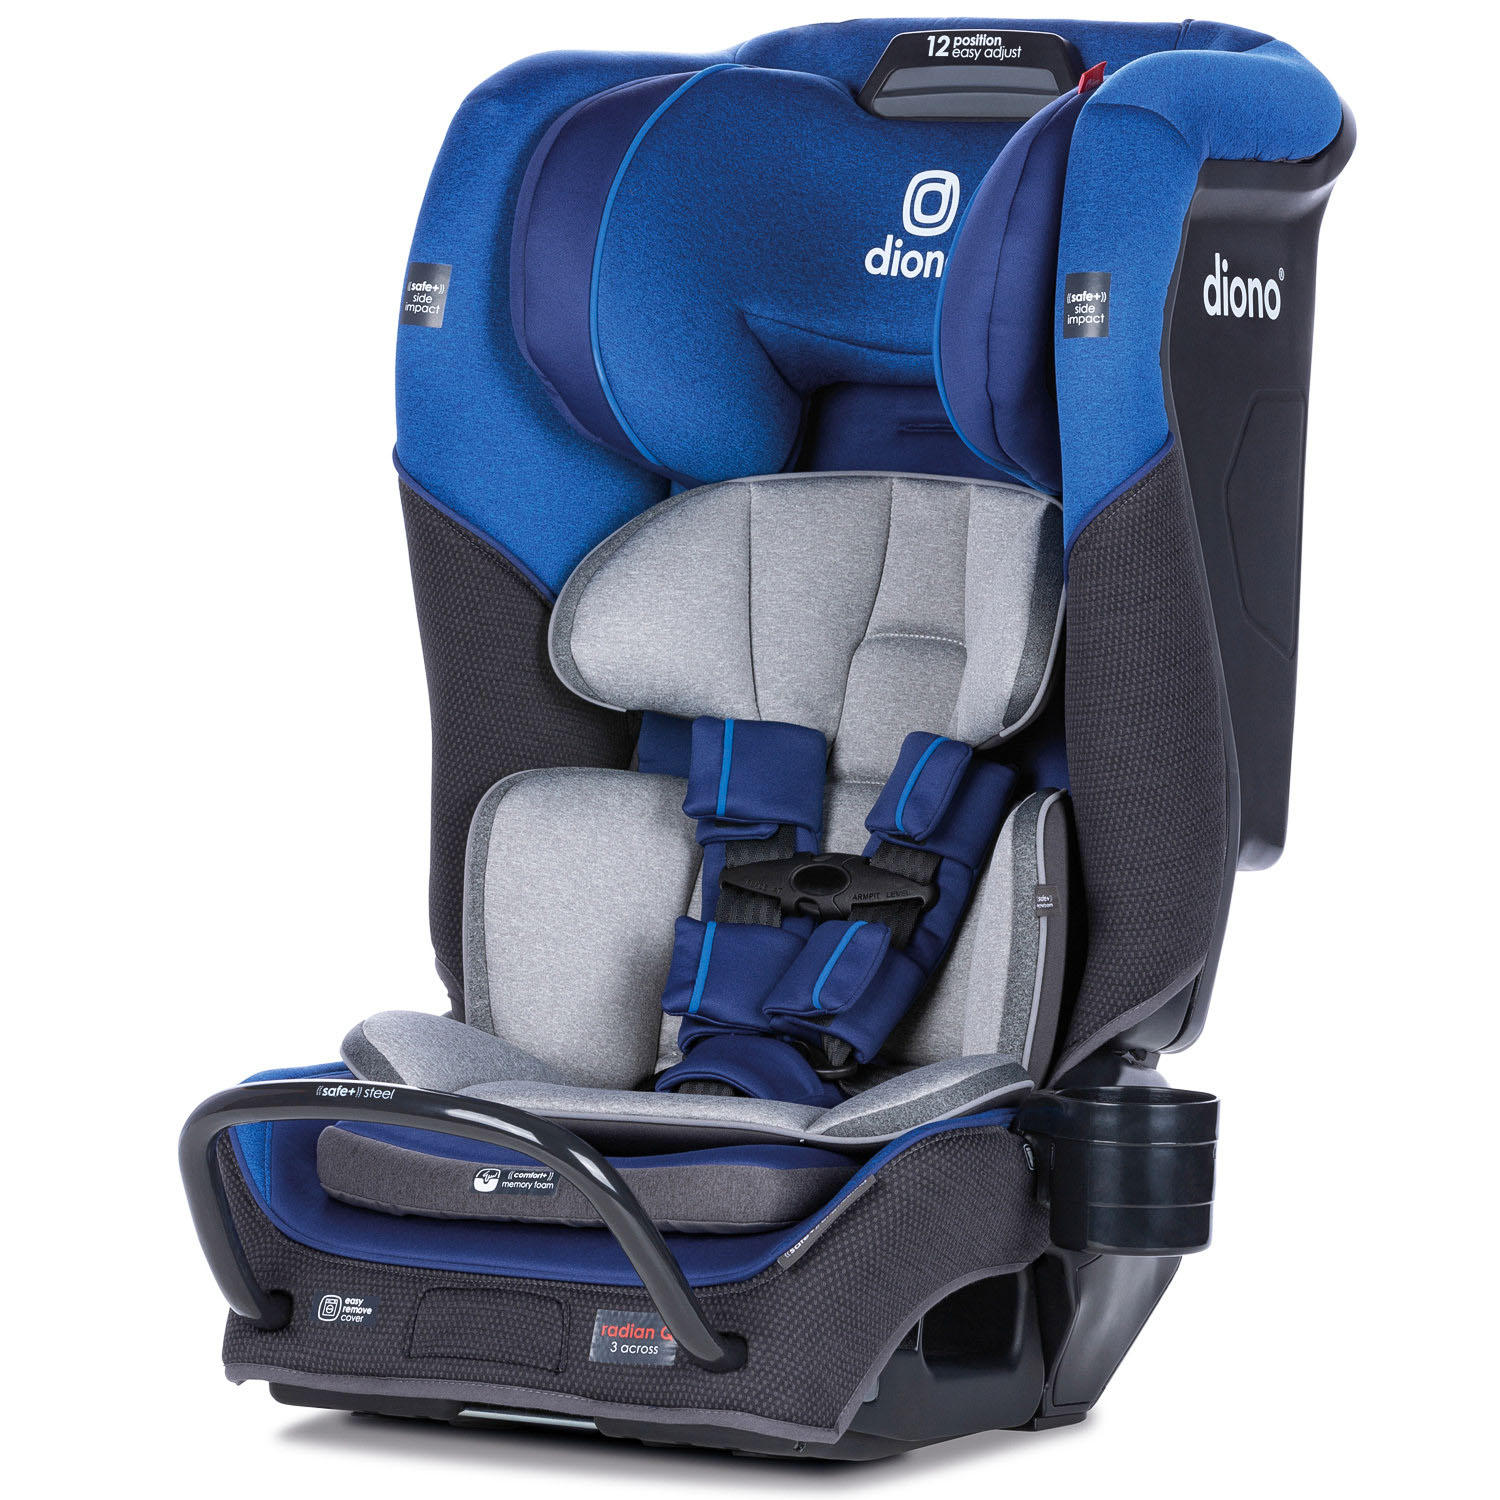 Diono Radian 3QX All-in-One Convertible Car Seat